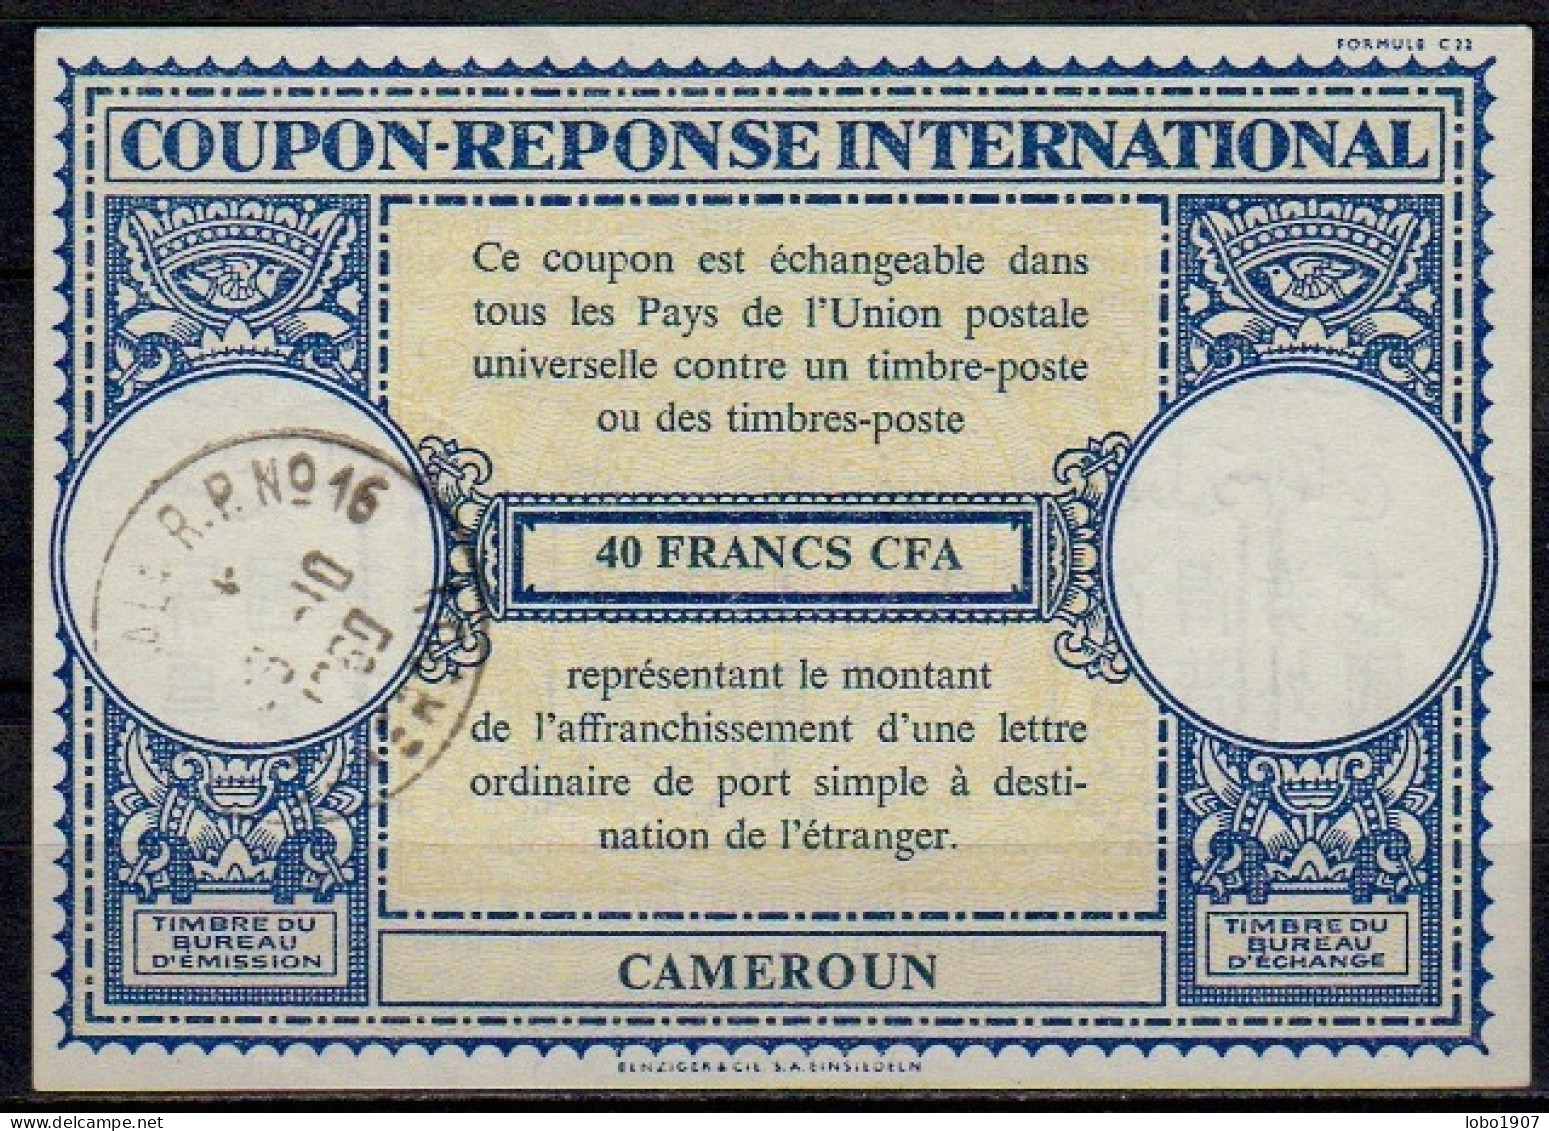 CAMEROUN, CAMEROON  Lo16n  40 FRANCS Int. Reply Coupon Reponse Antwortschein IRC IAS Cupon Respuesta  DOUALA 29.10.60 - Cameroon (1960-...)